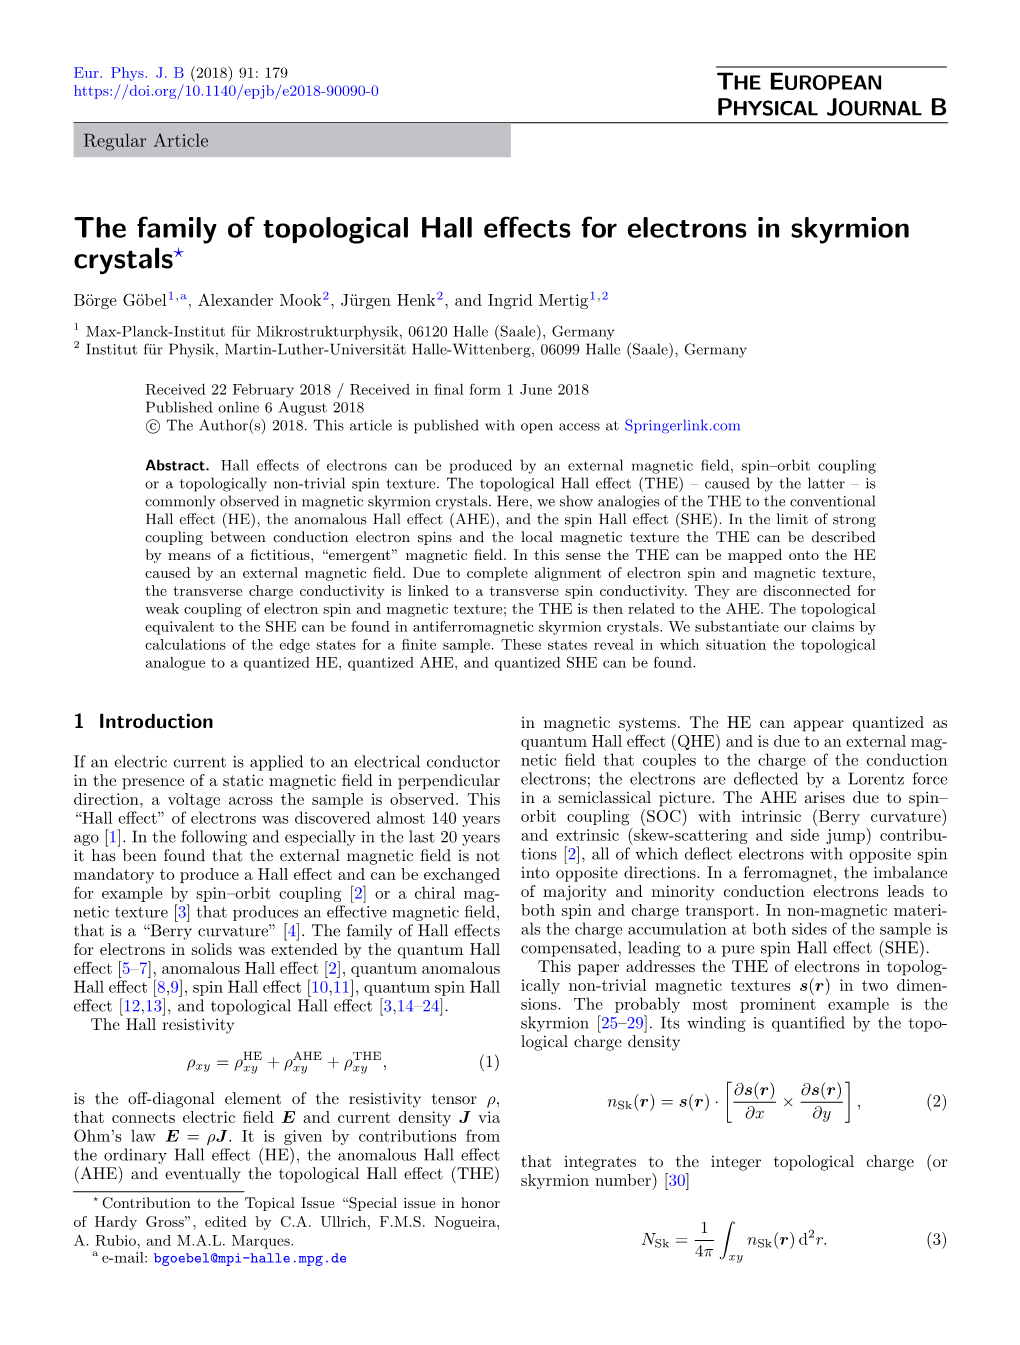 The Family of Topological Hall Effects for Electrons in Skyrmion Crystals